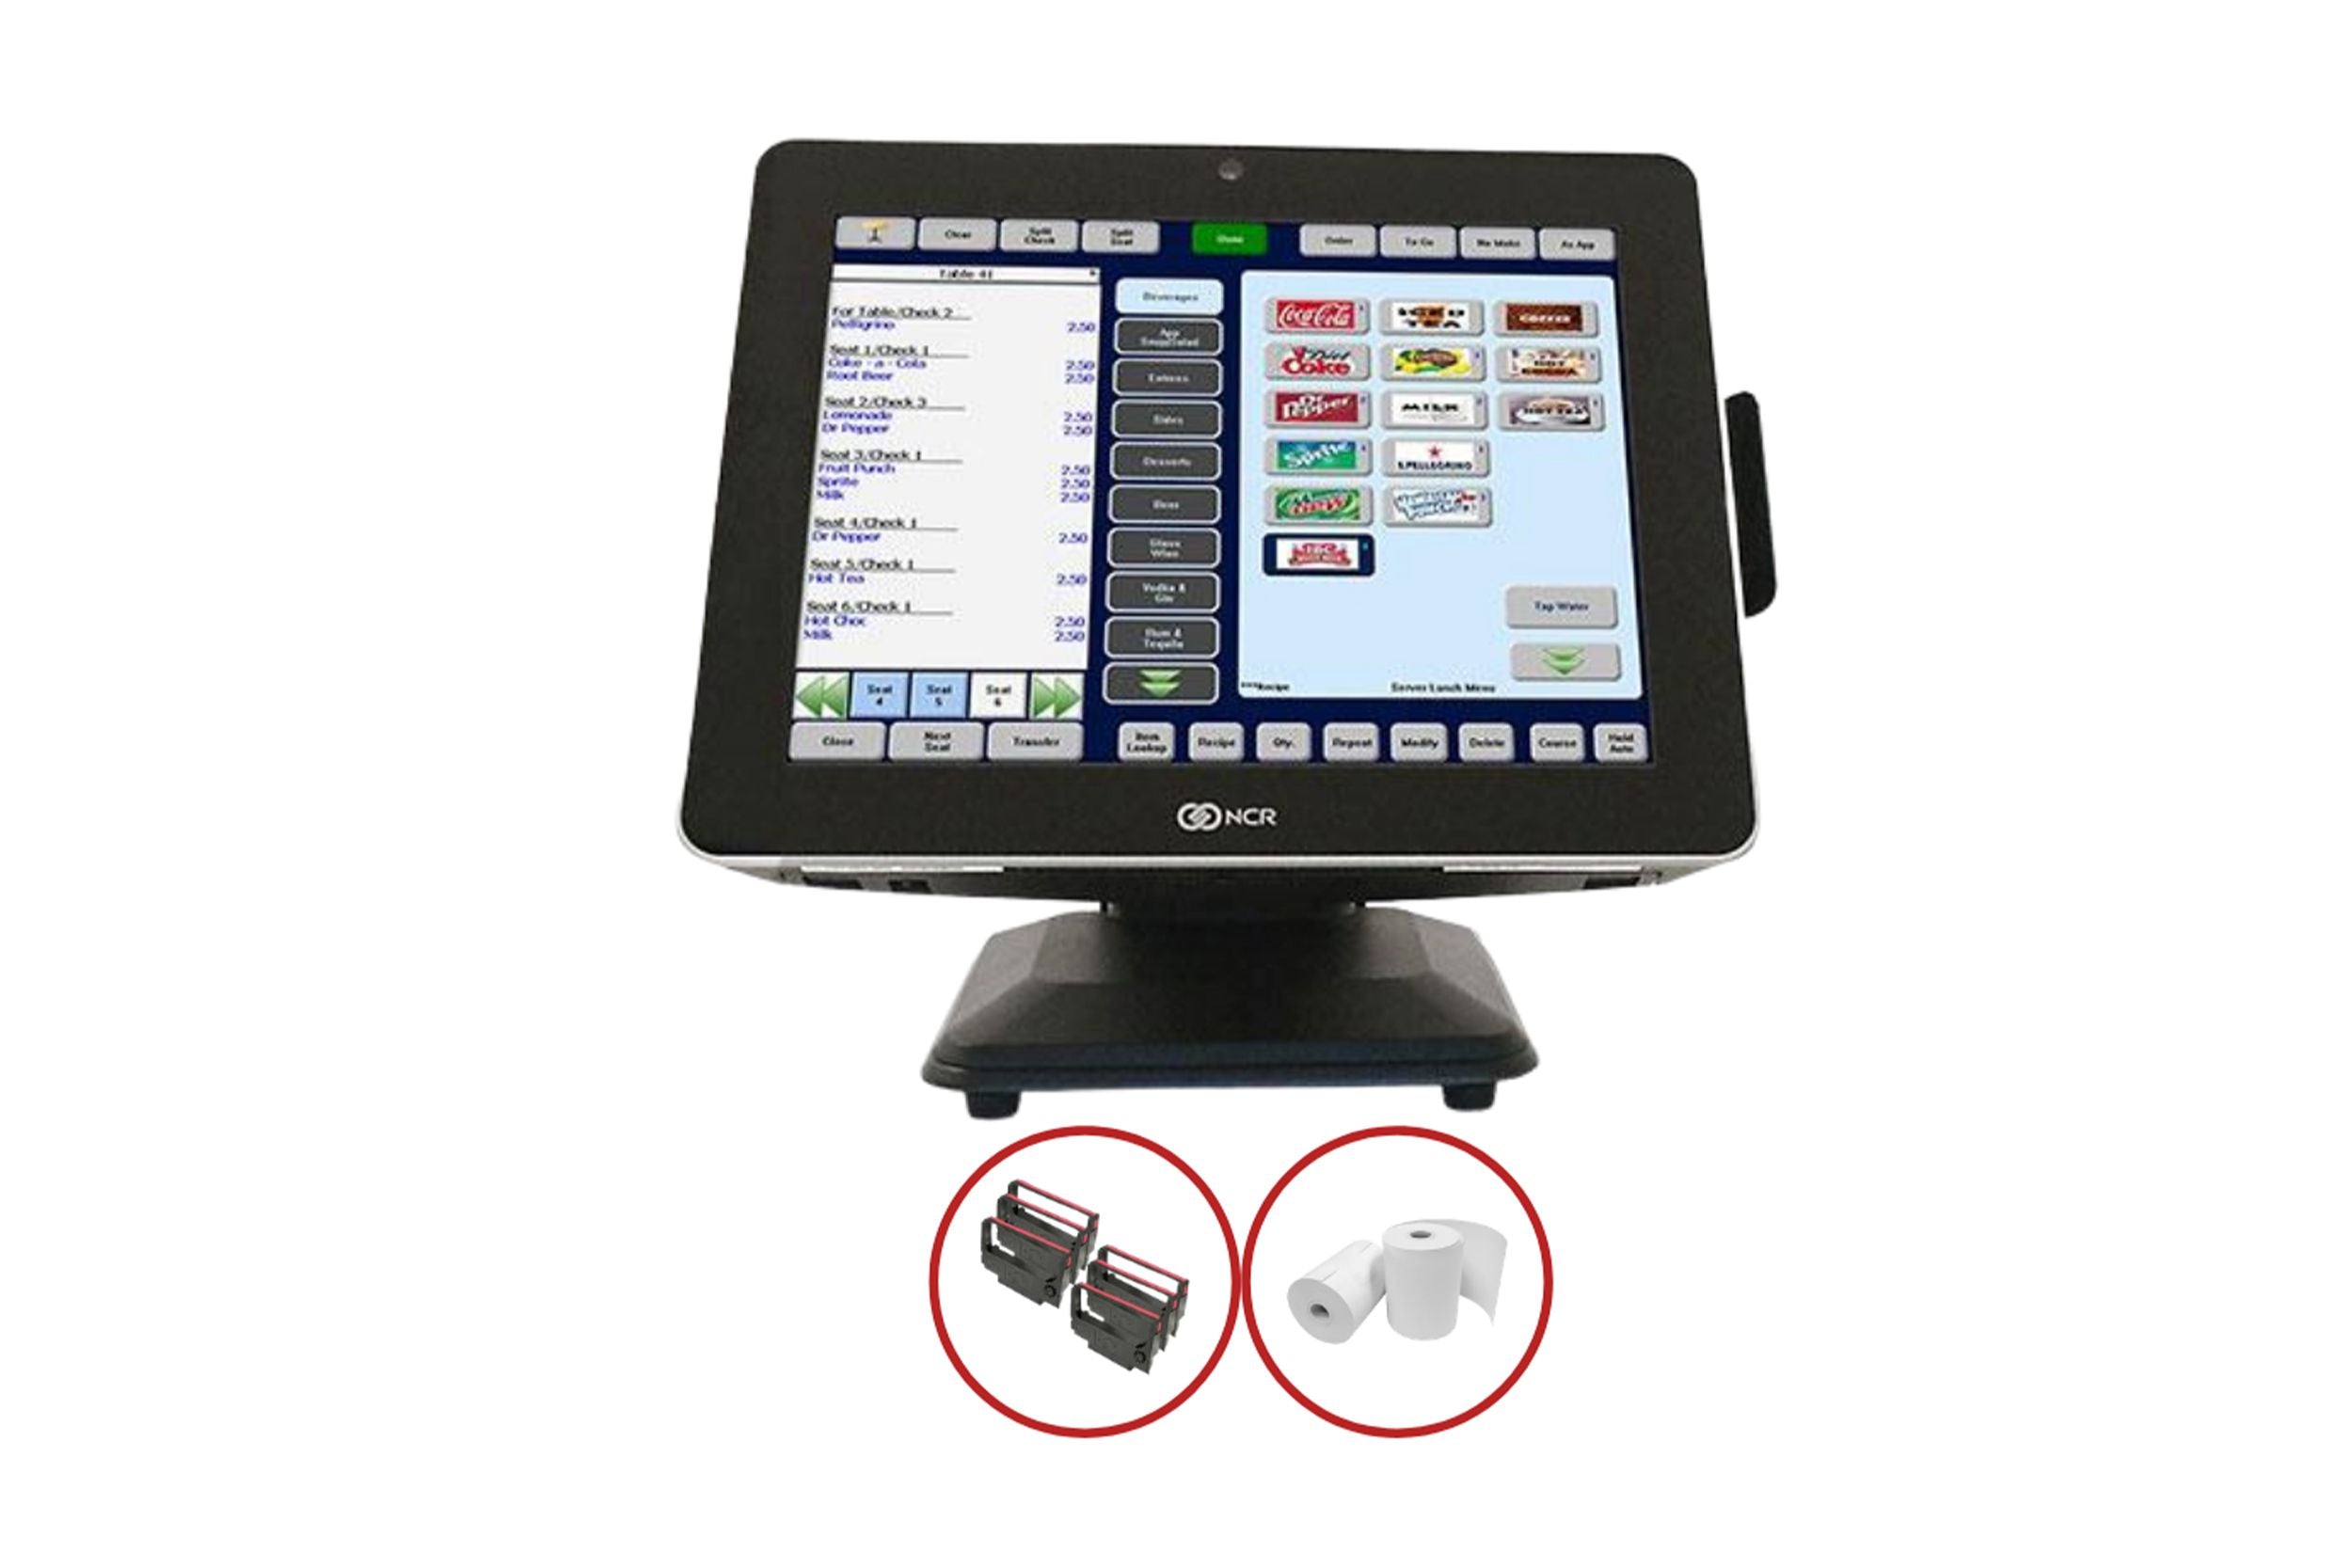 Aloha POS System | Point Of Sale Machines/Terminals | eMerchant Authority